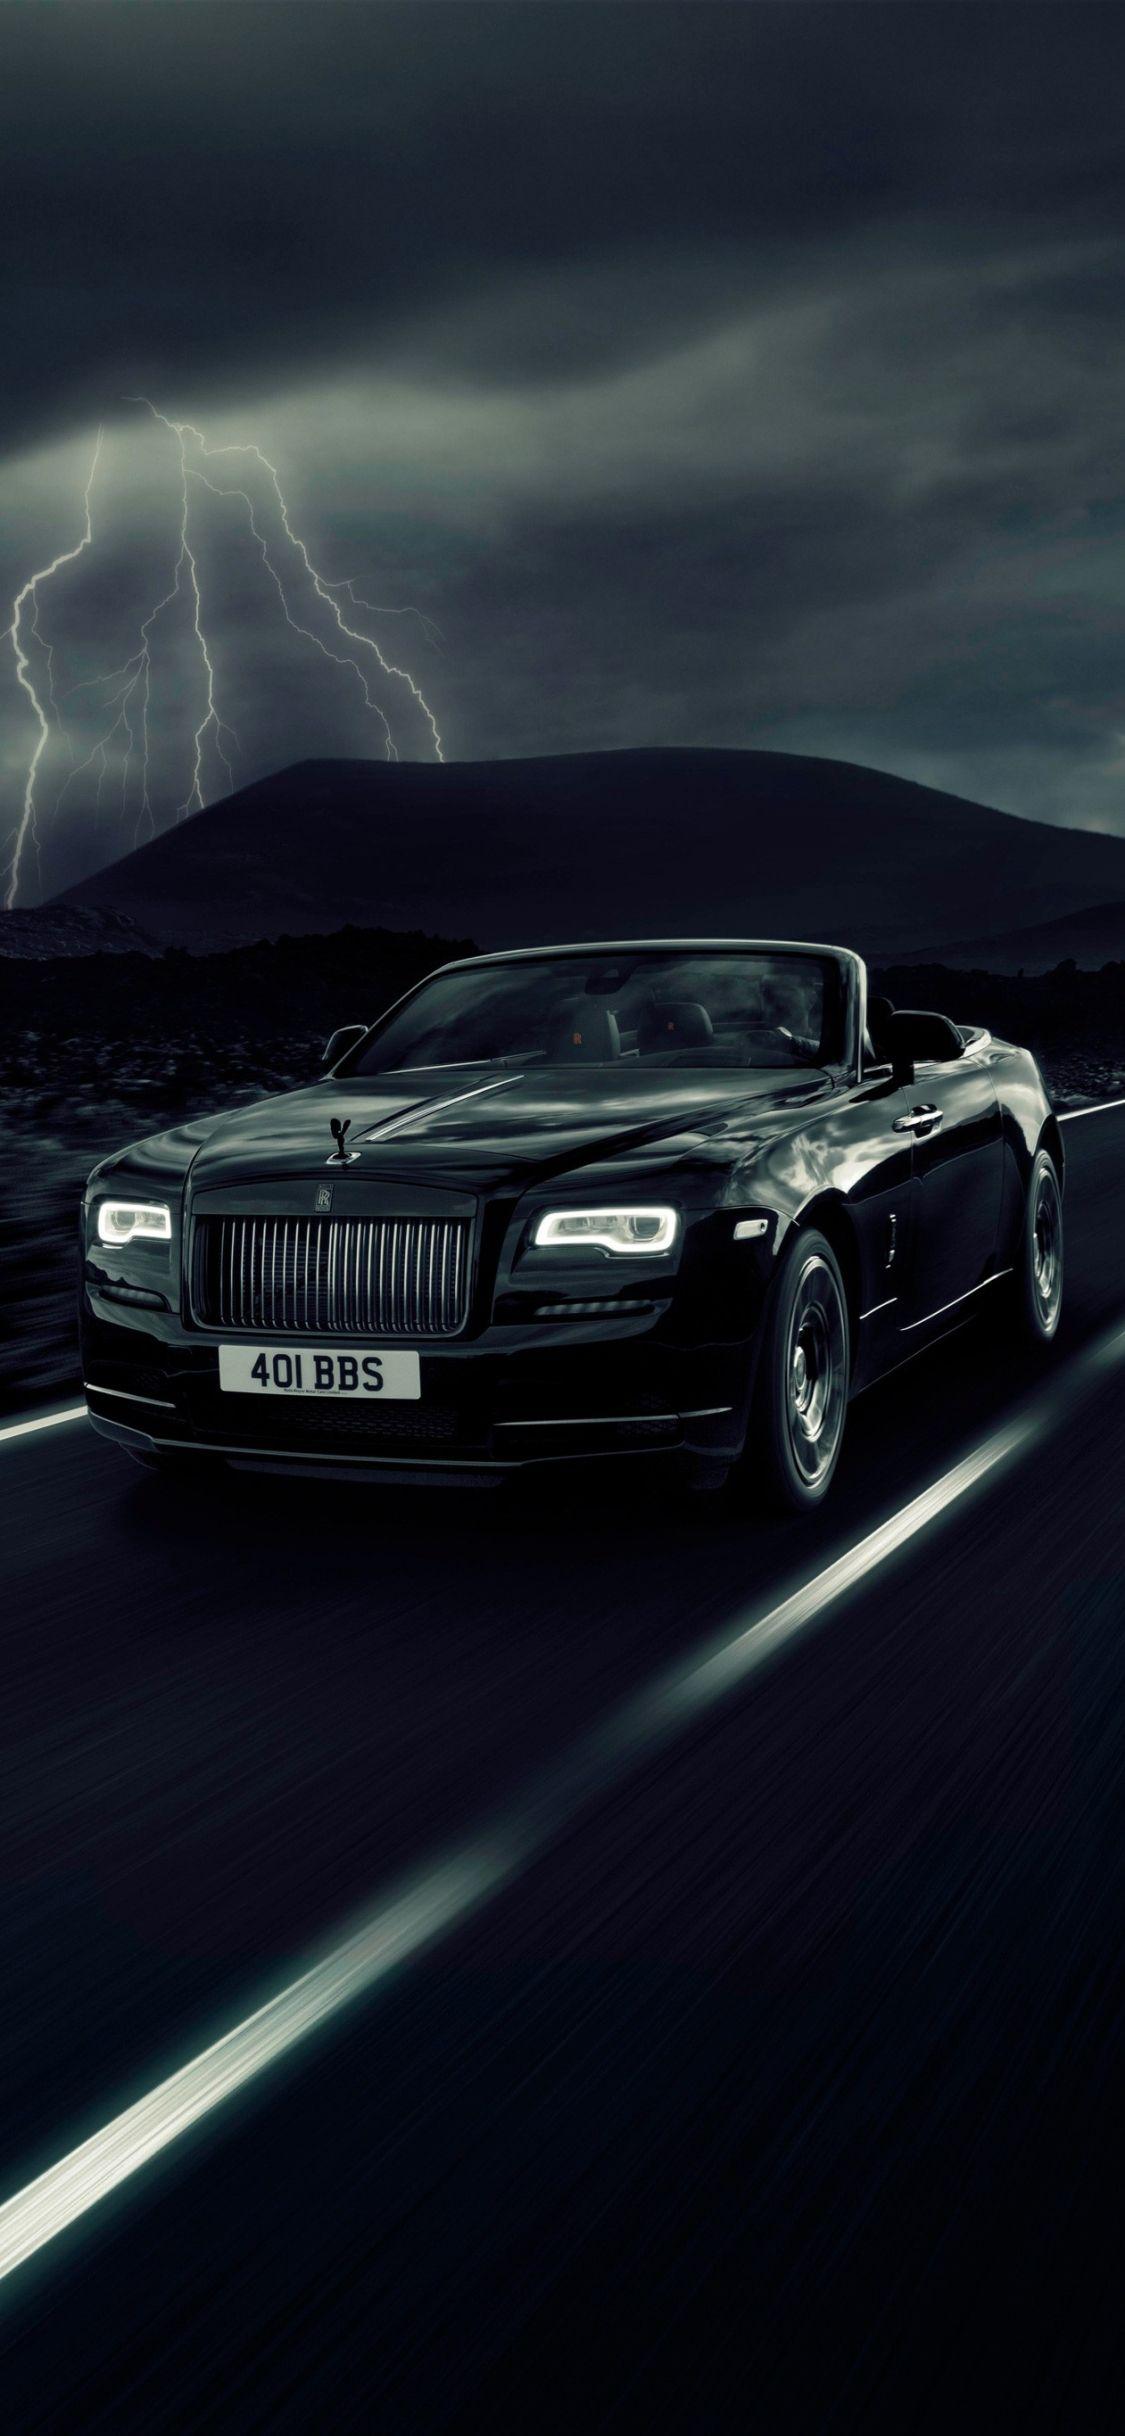 Download Rolls Royce Dawn mobile wallpaper for your Android